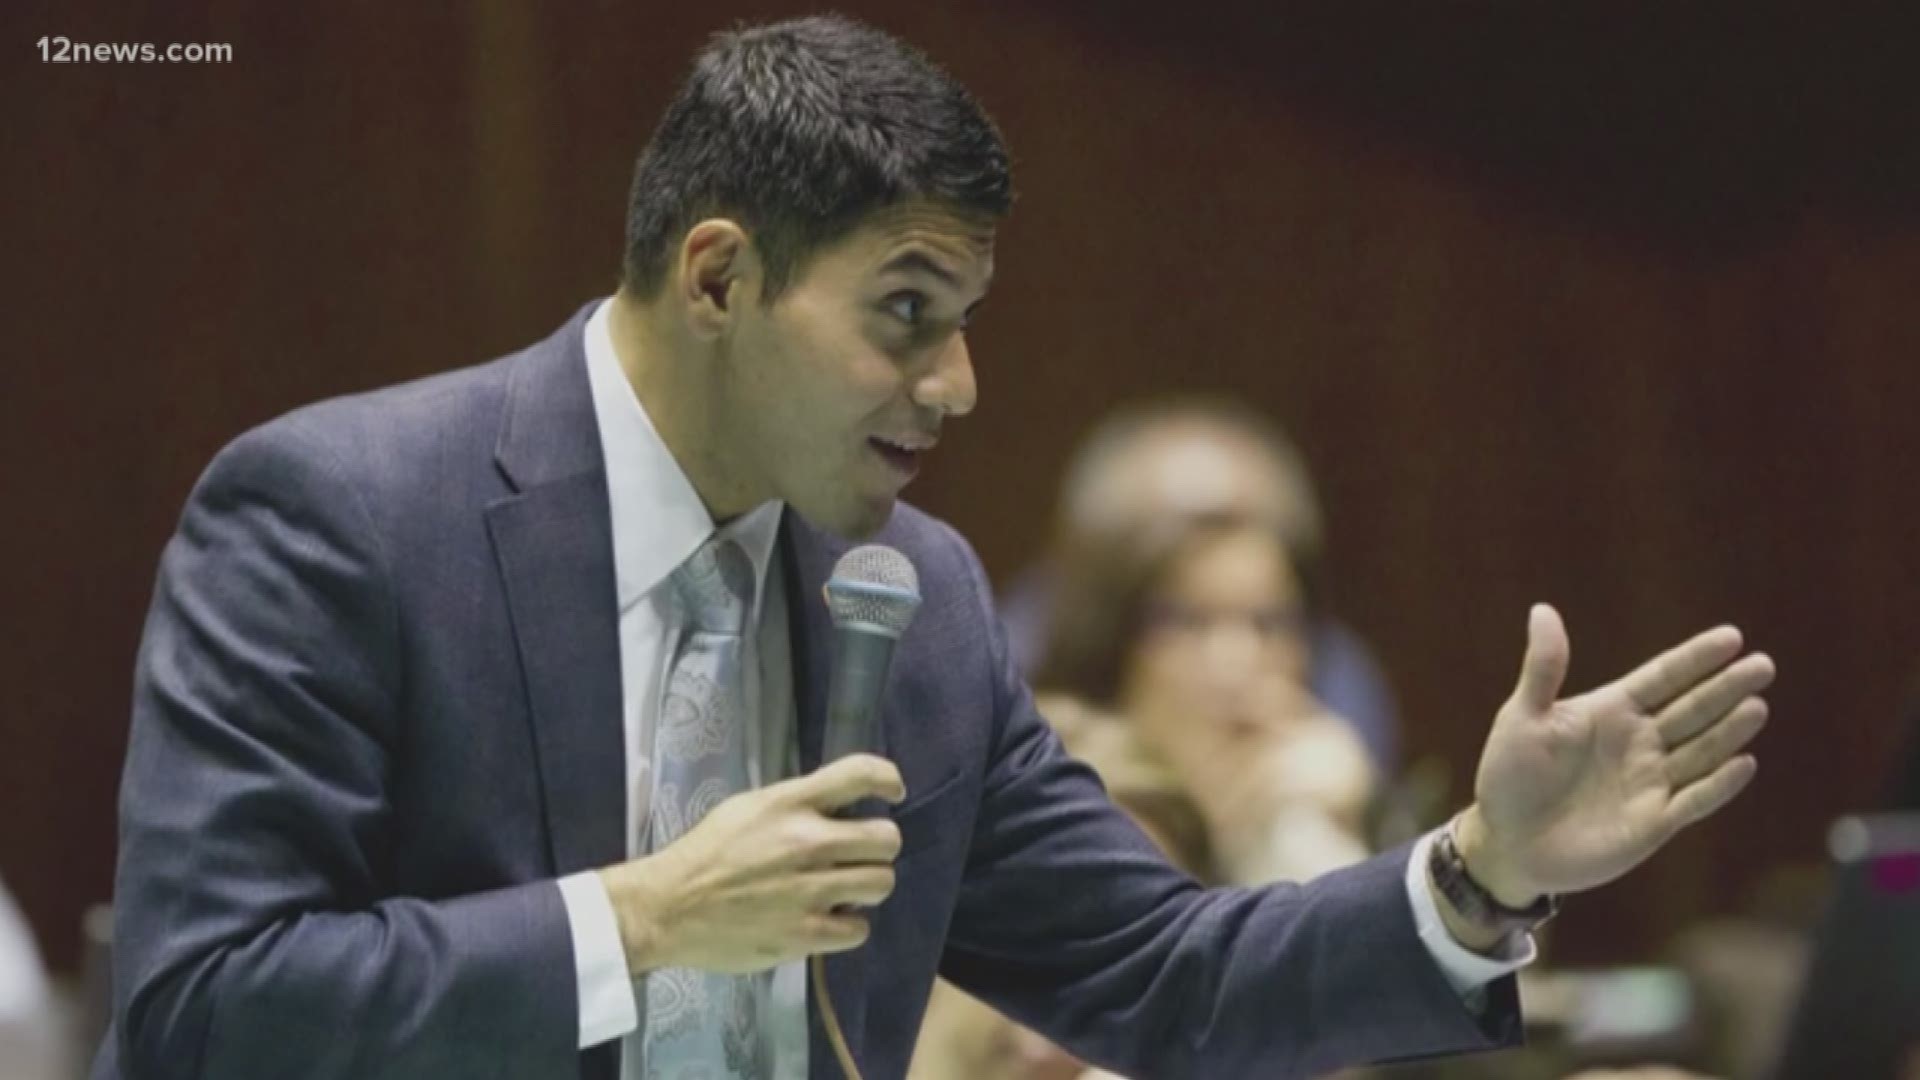 A legislative staffer sent Steve Montenegro a topless photo via text message, according to a series of messages between Montenegro and the staffer that were reviewed by 12 News.